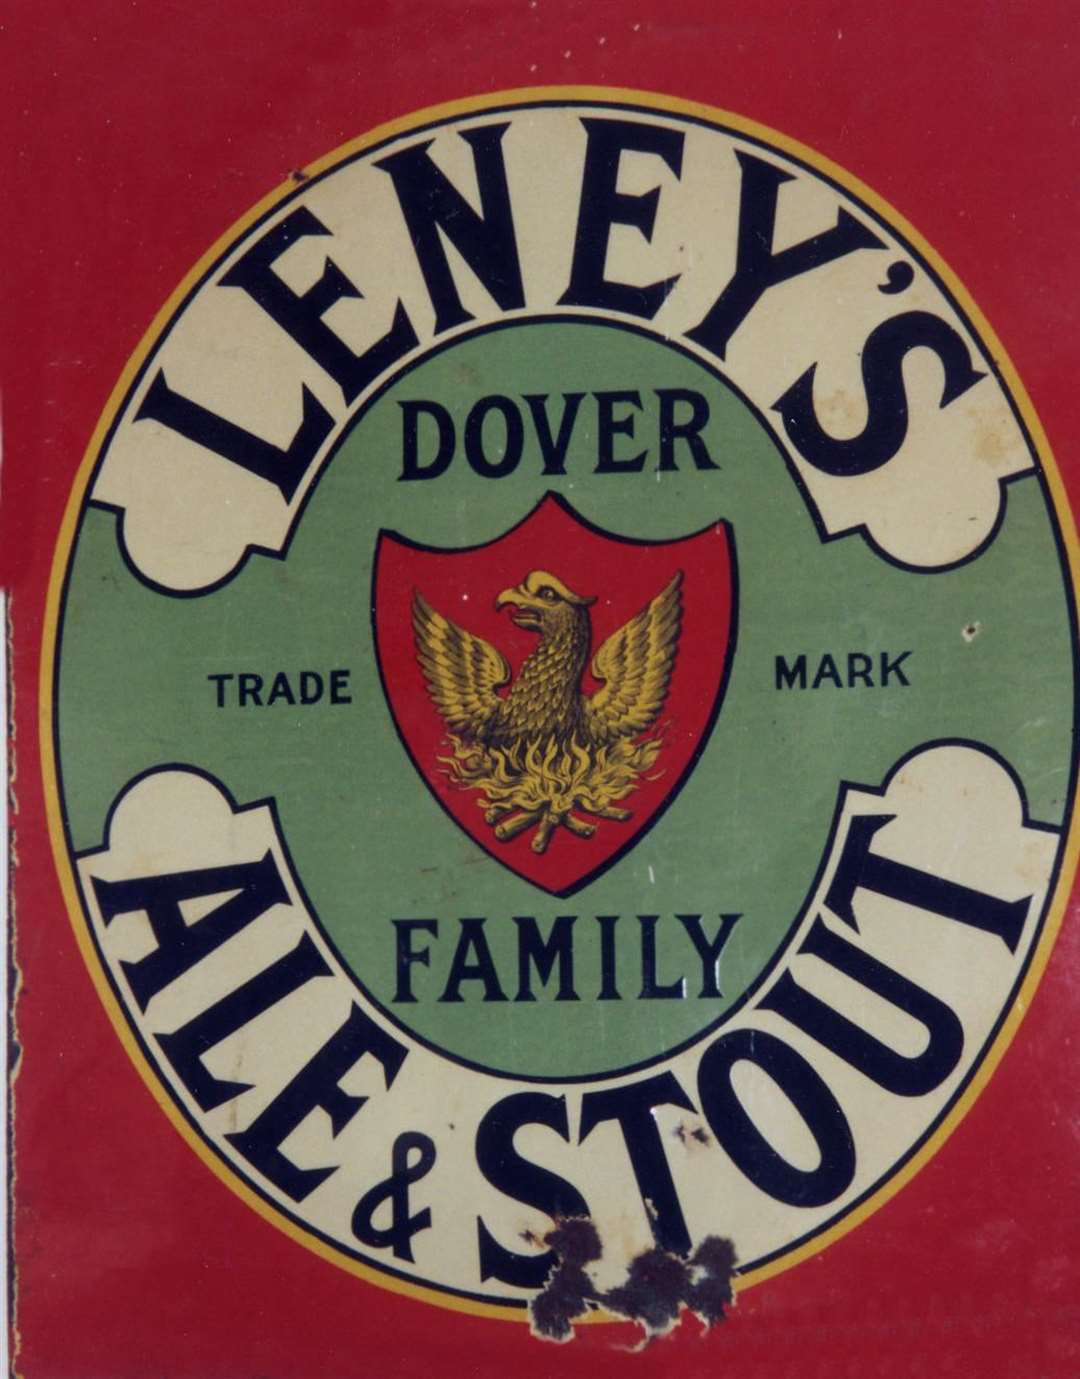 An Alfred Leney bottle label from the Dover brewery